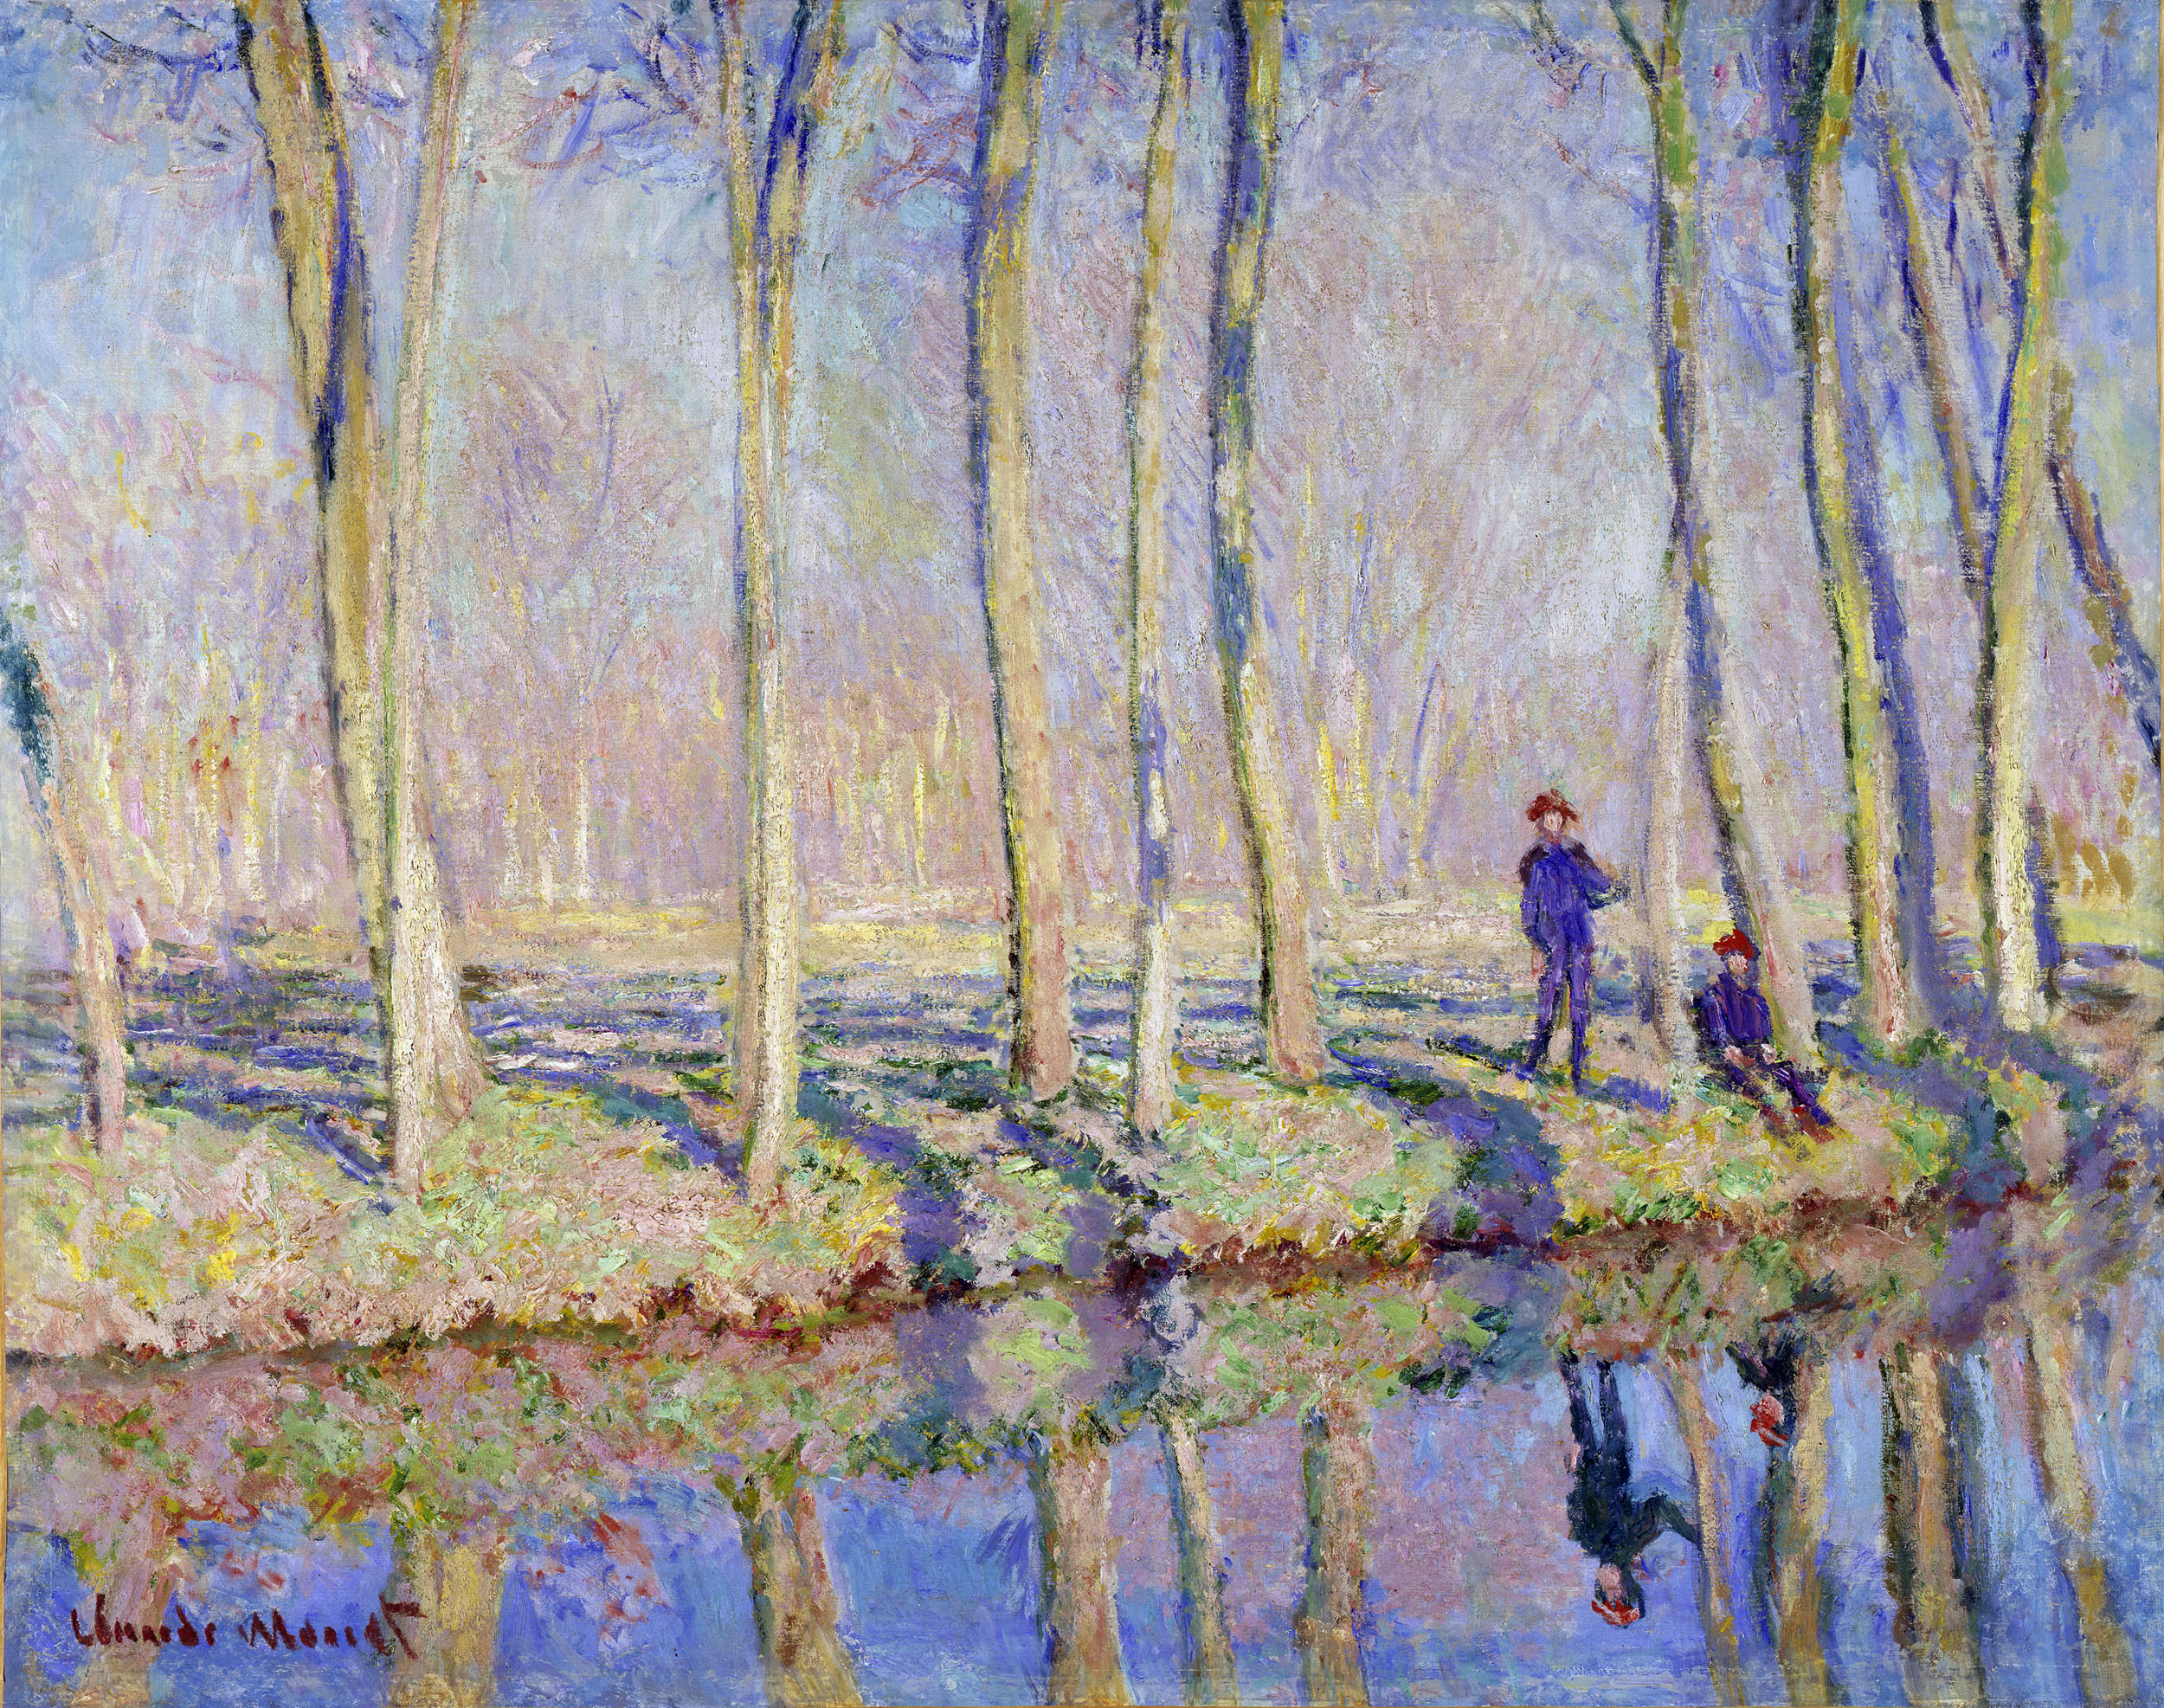 Claude Monet (French, 1840-1926) 'Jean-Pierre Hoschedé and Michel Monet on the Banks of the Epte' c. 1887-1890